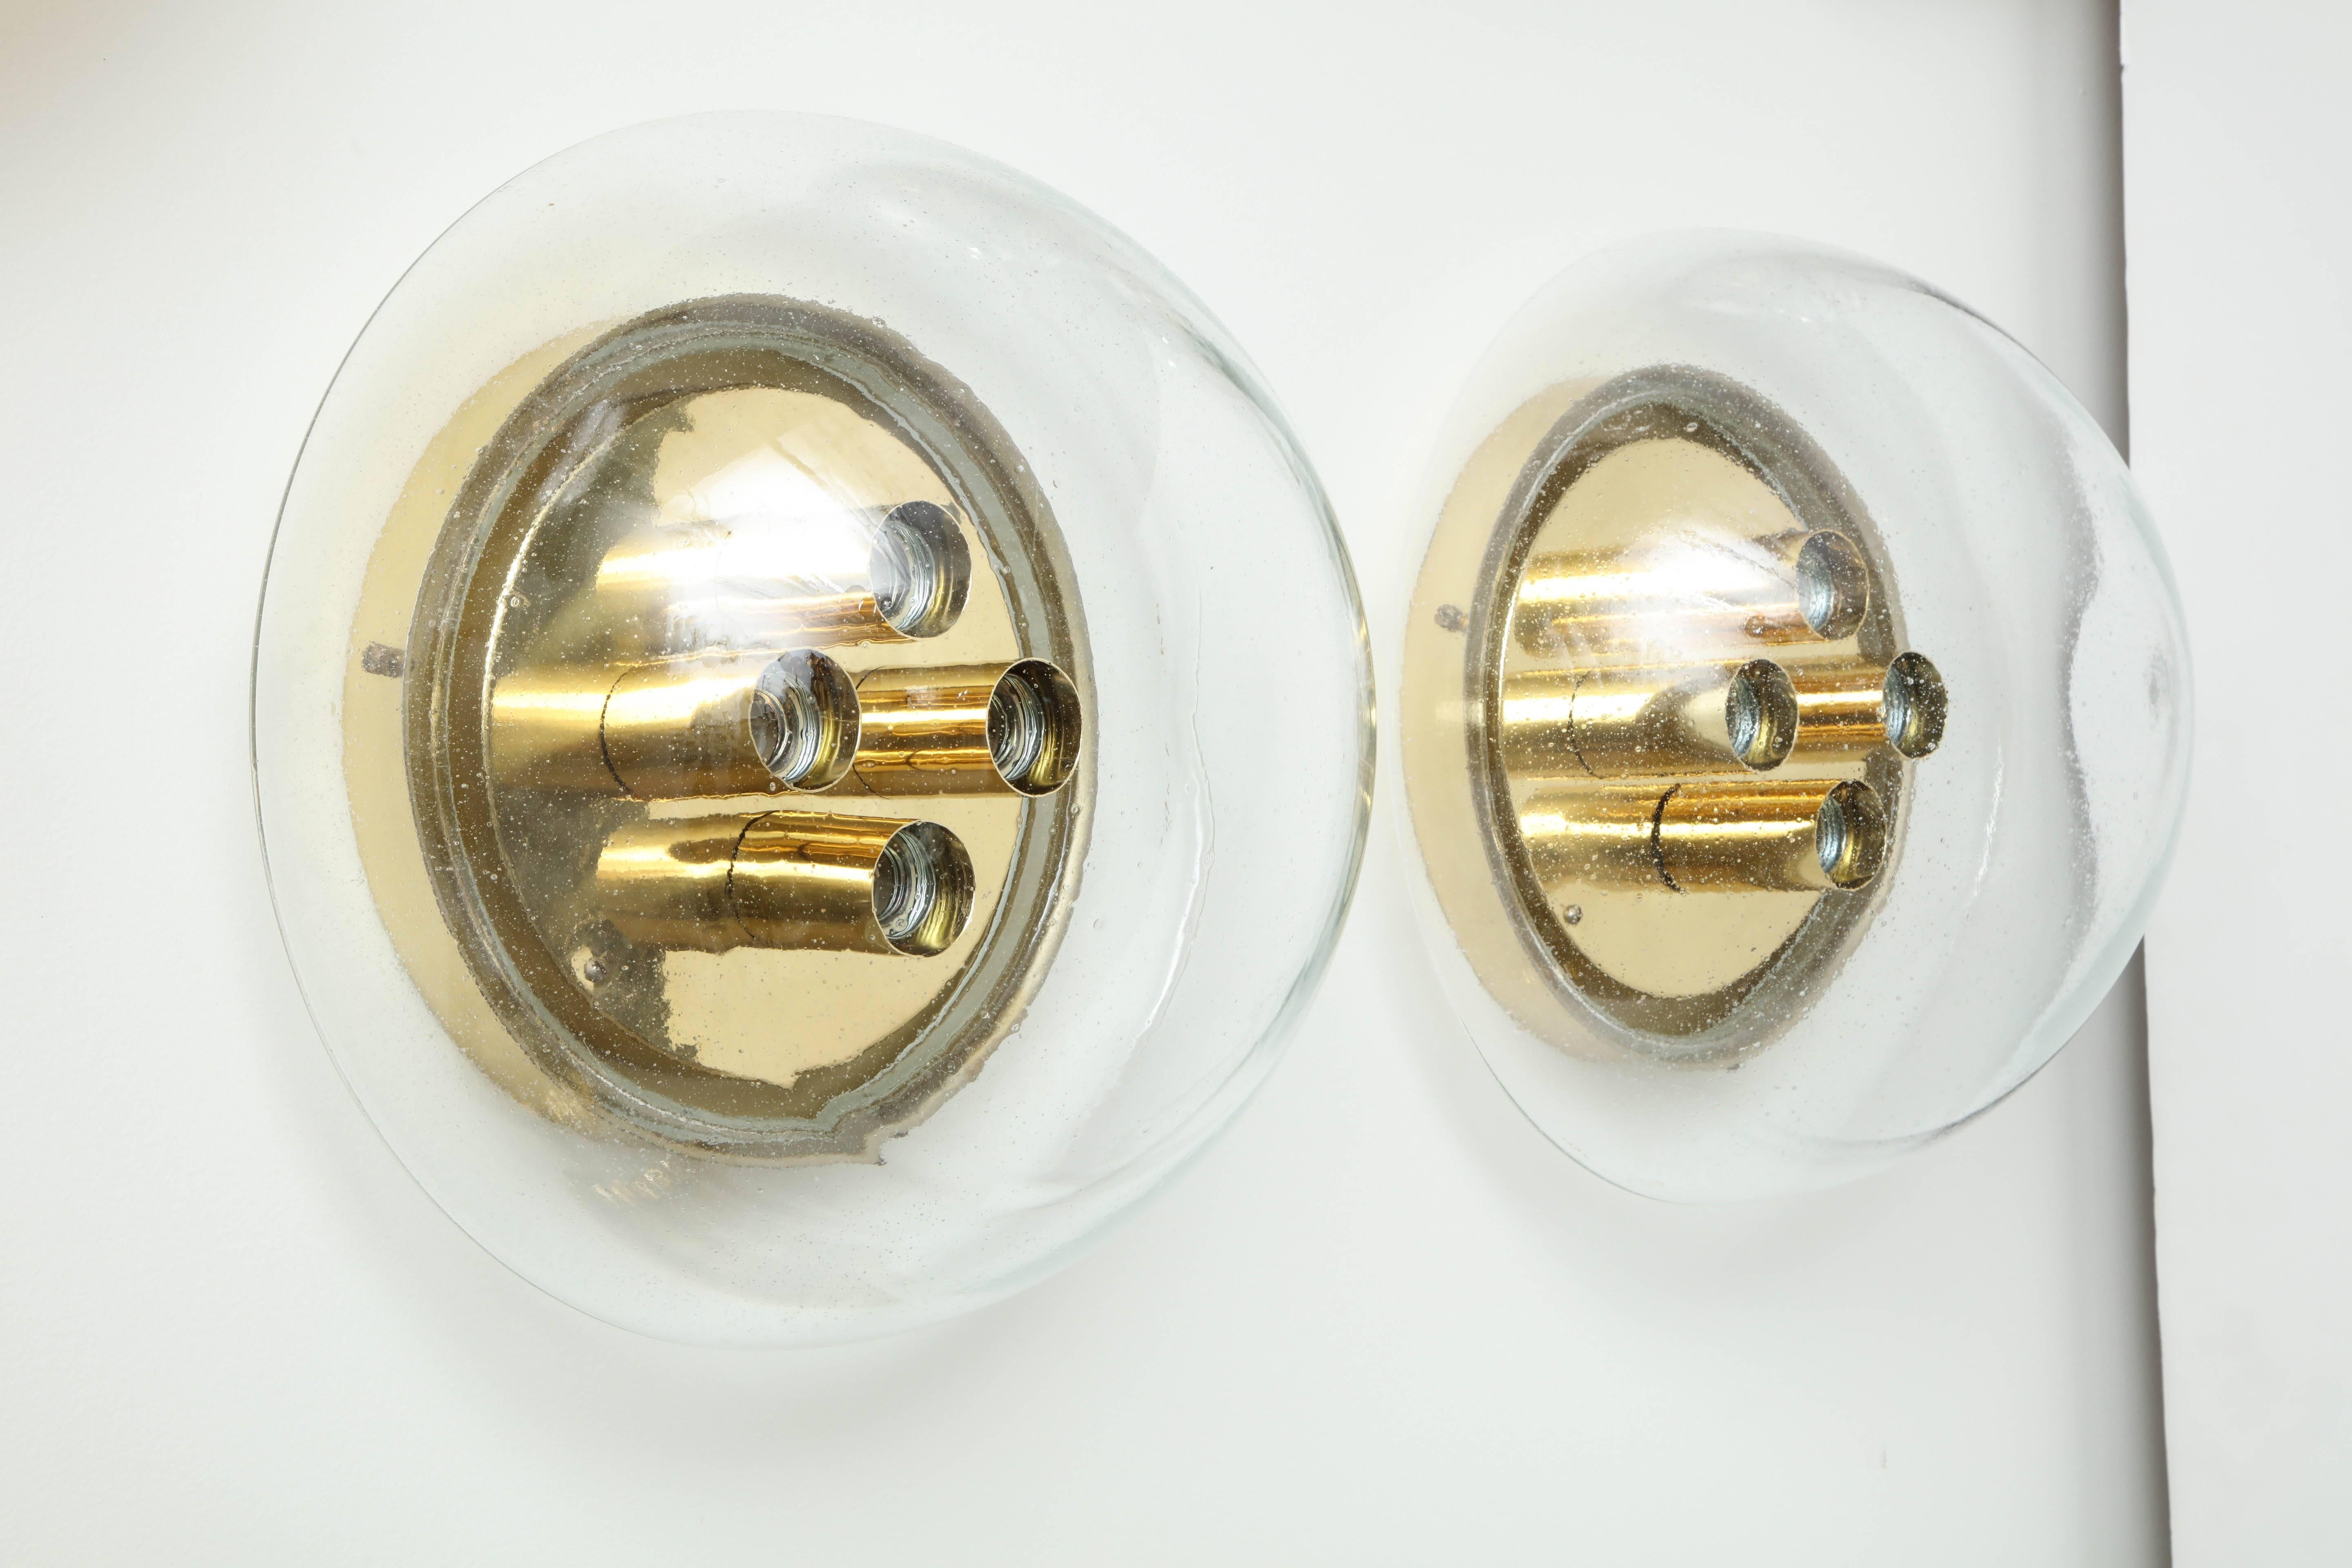 Large pair of glass flush mounts / sconces by Limburg.
The large bubble glass element is supported by a polished brass plate with four light sources that has been newly rewired for the US.
There are two pairs available and they are priced at $3200